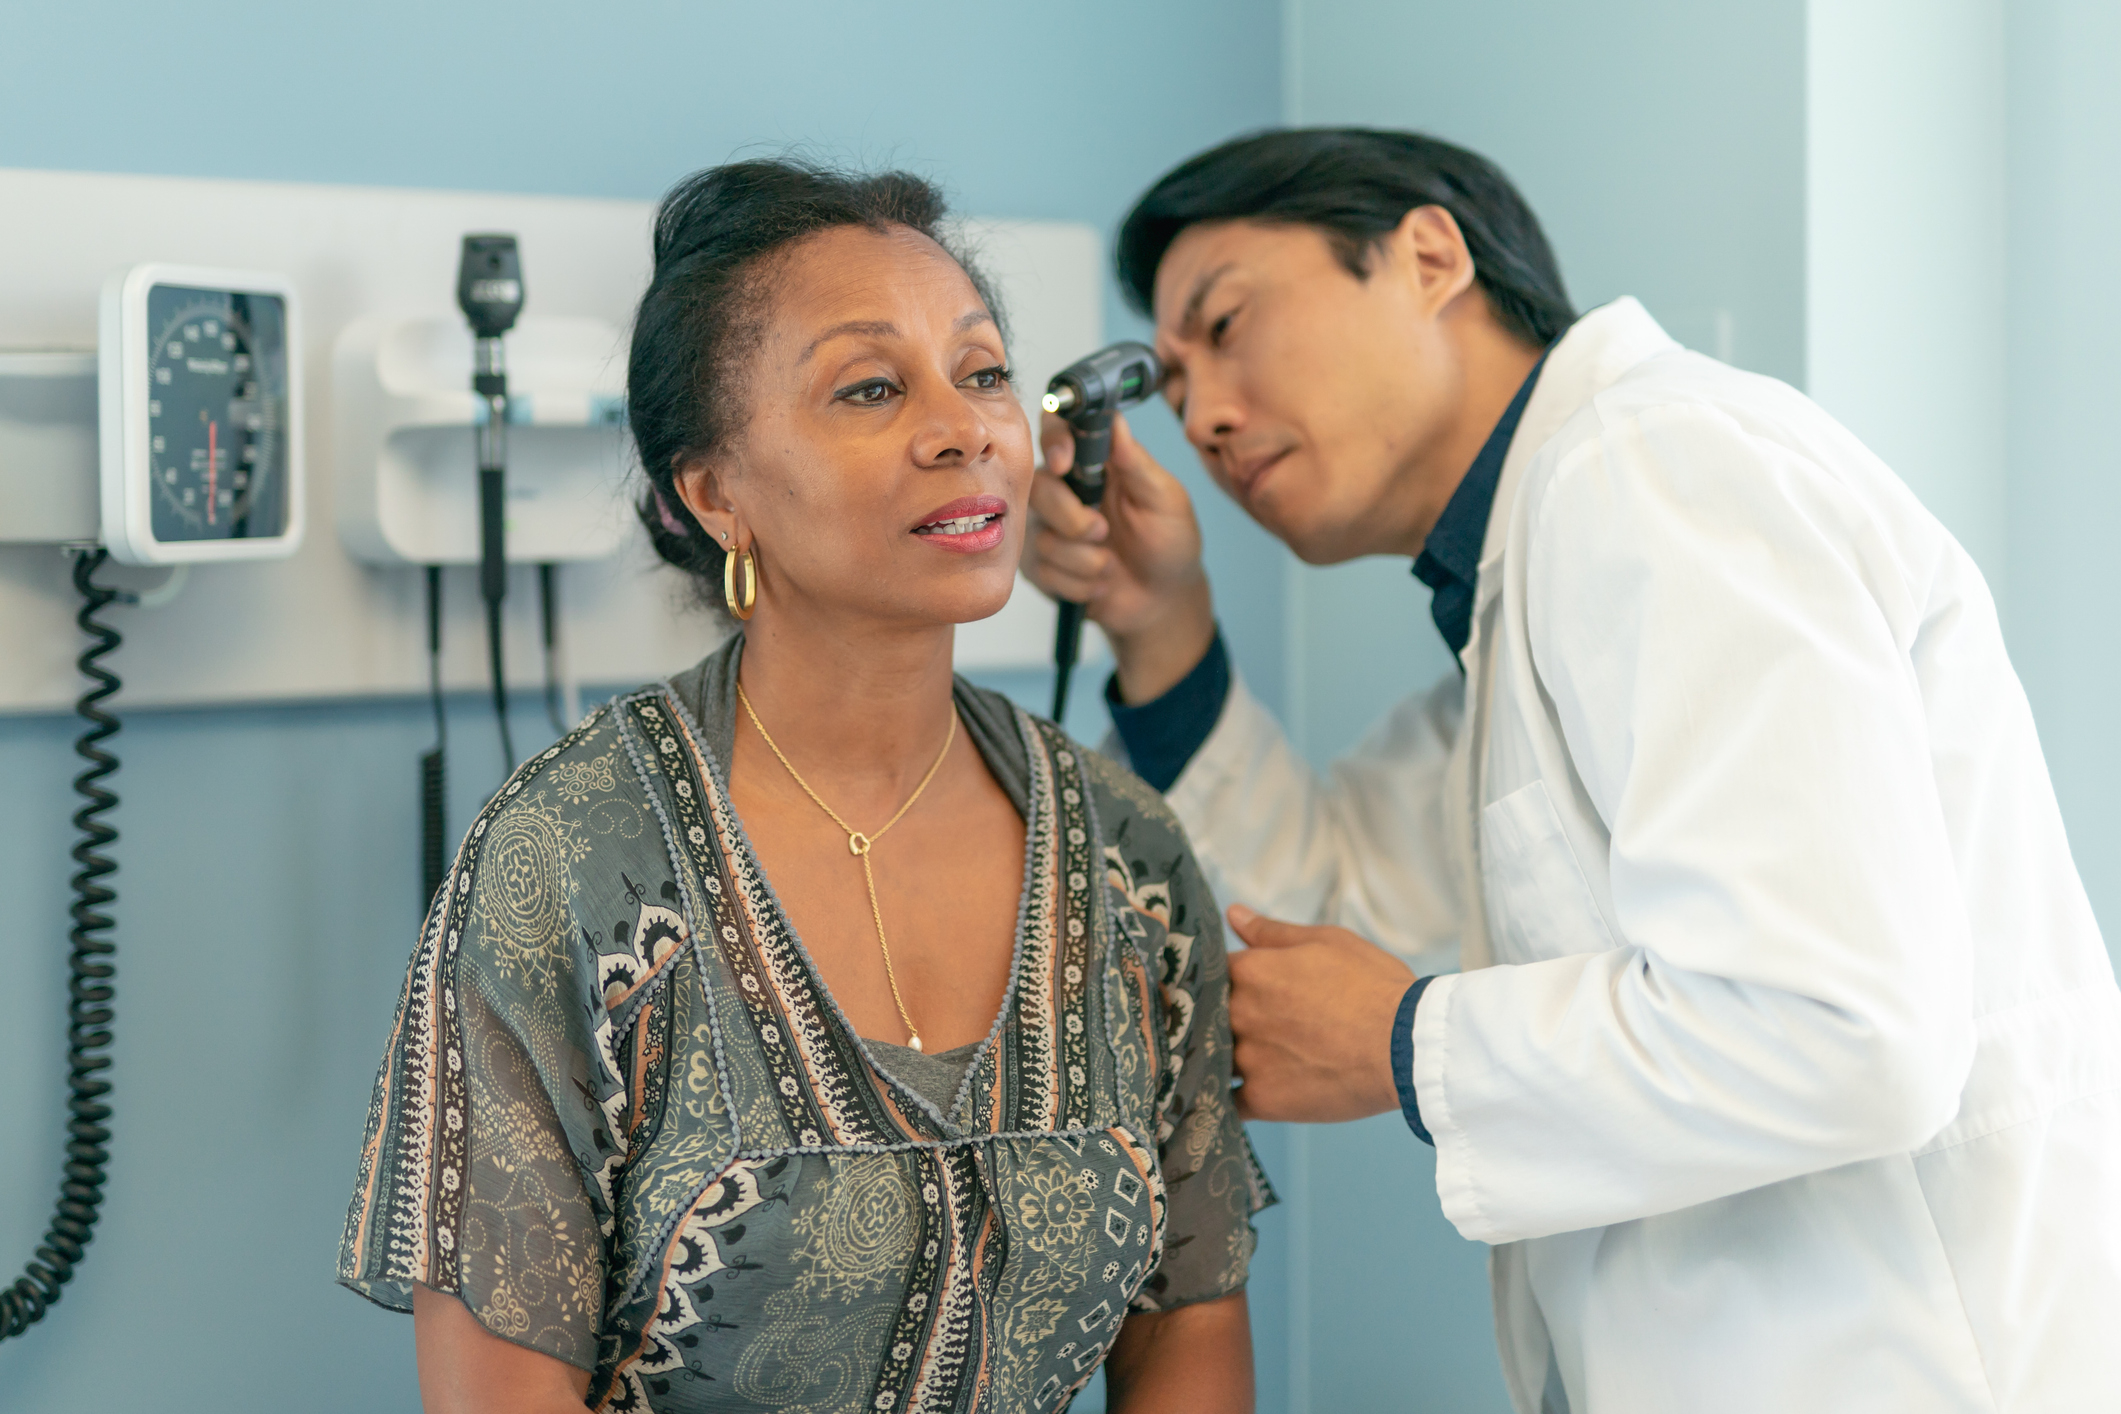 Doctor performing an ear examination on a female patient in a medical office